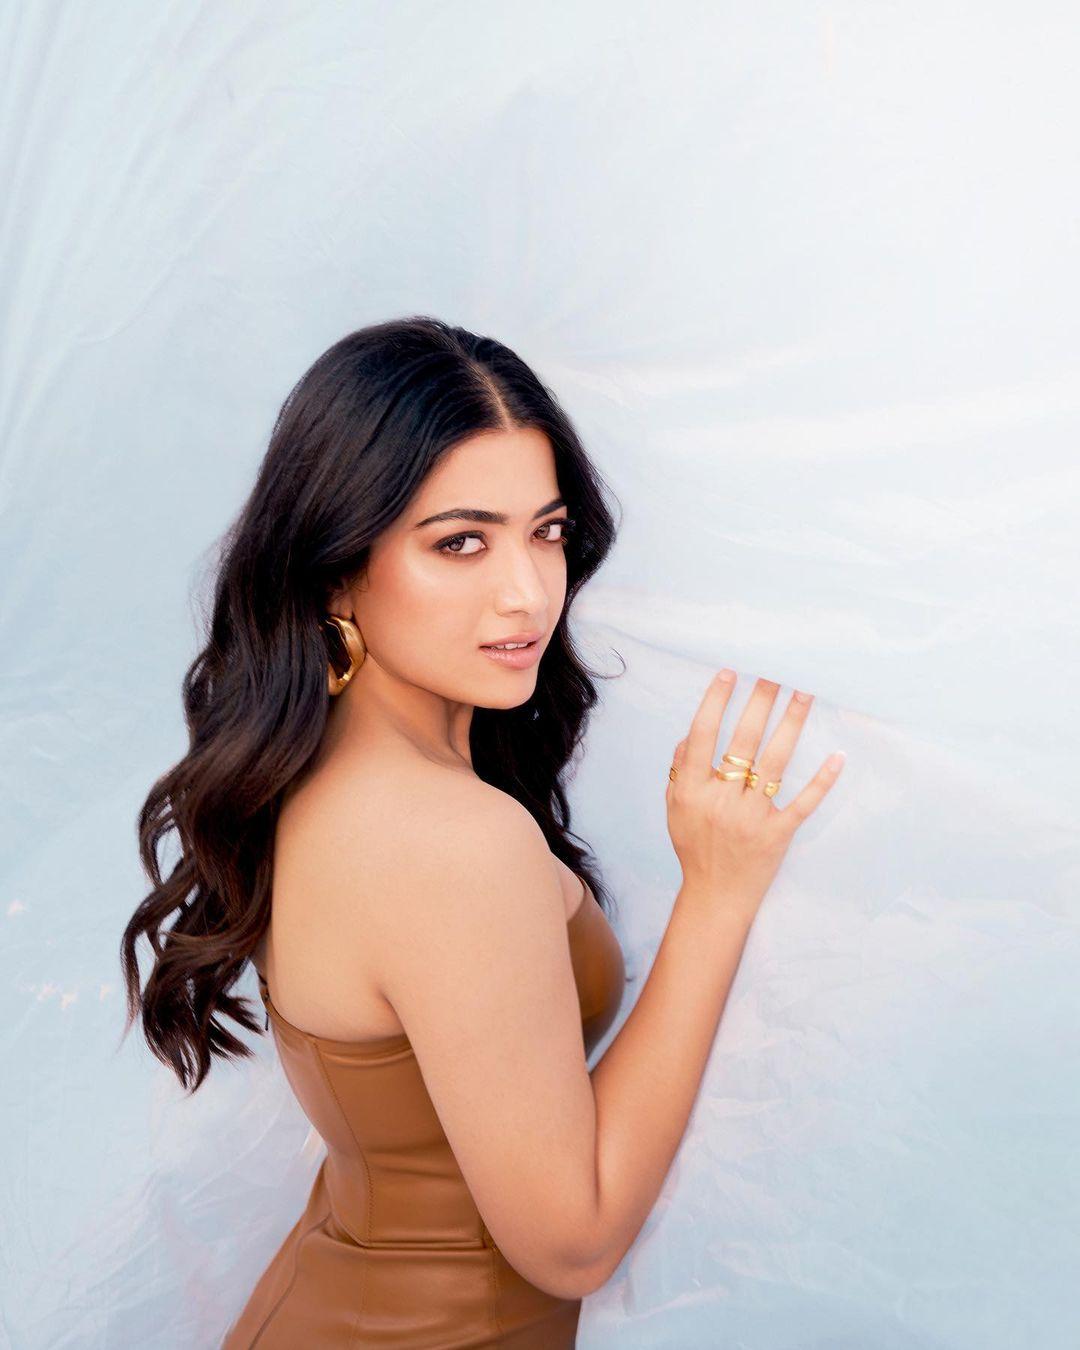 This look from Rashmika is just perfect to make a statement at your friend's birthday party